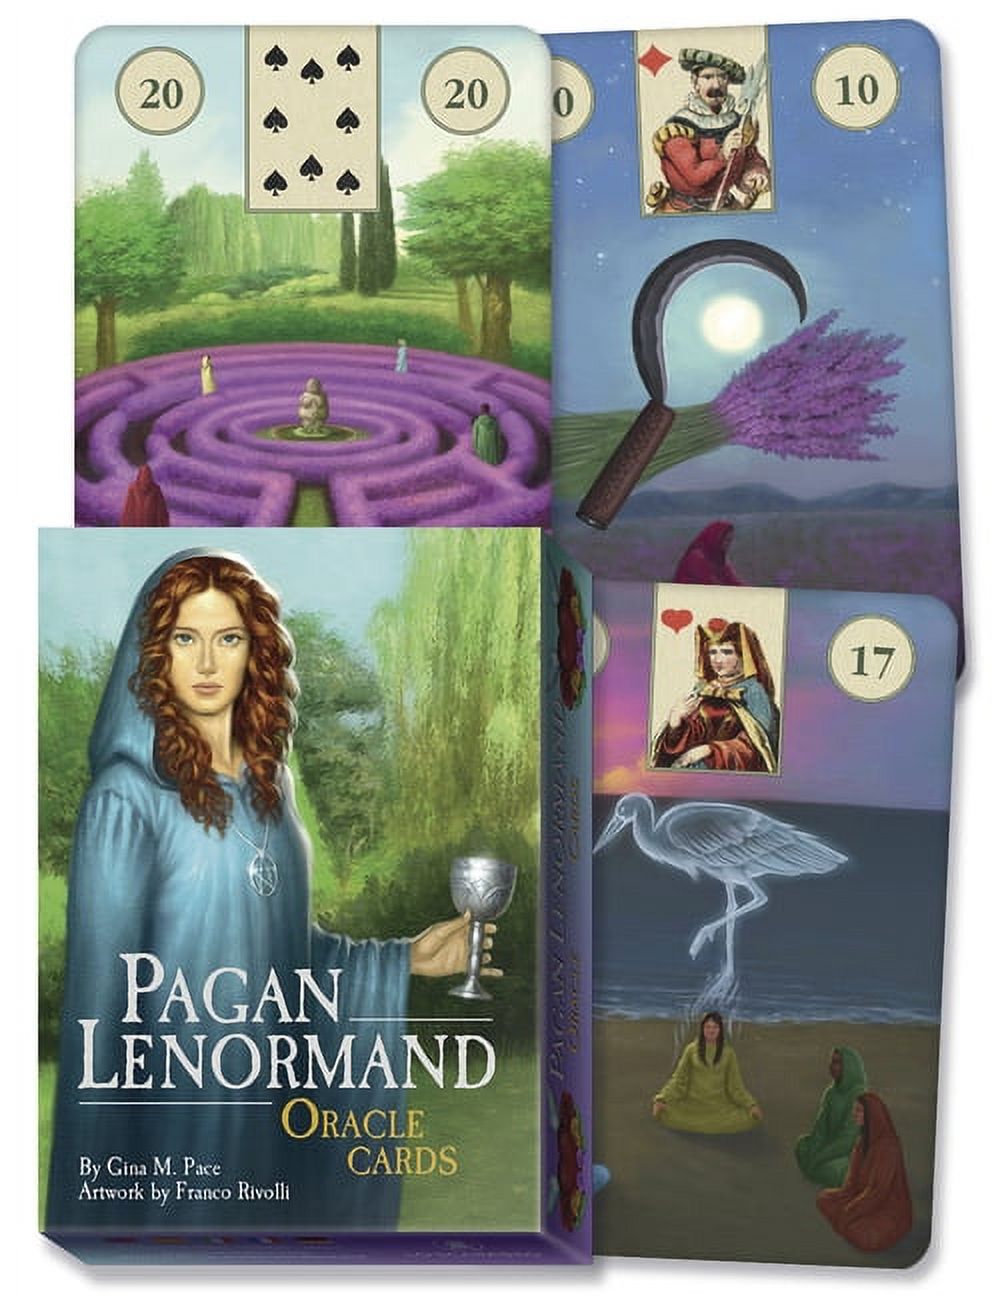 Pagan Tarot: Pagan Lenormand Oracle Cards (Other) - image 1 of 1